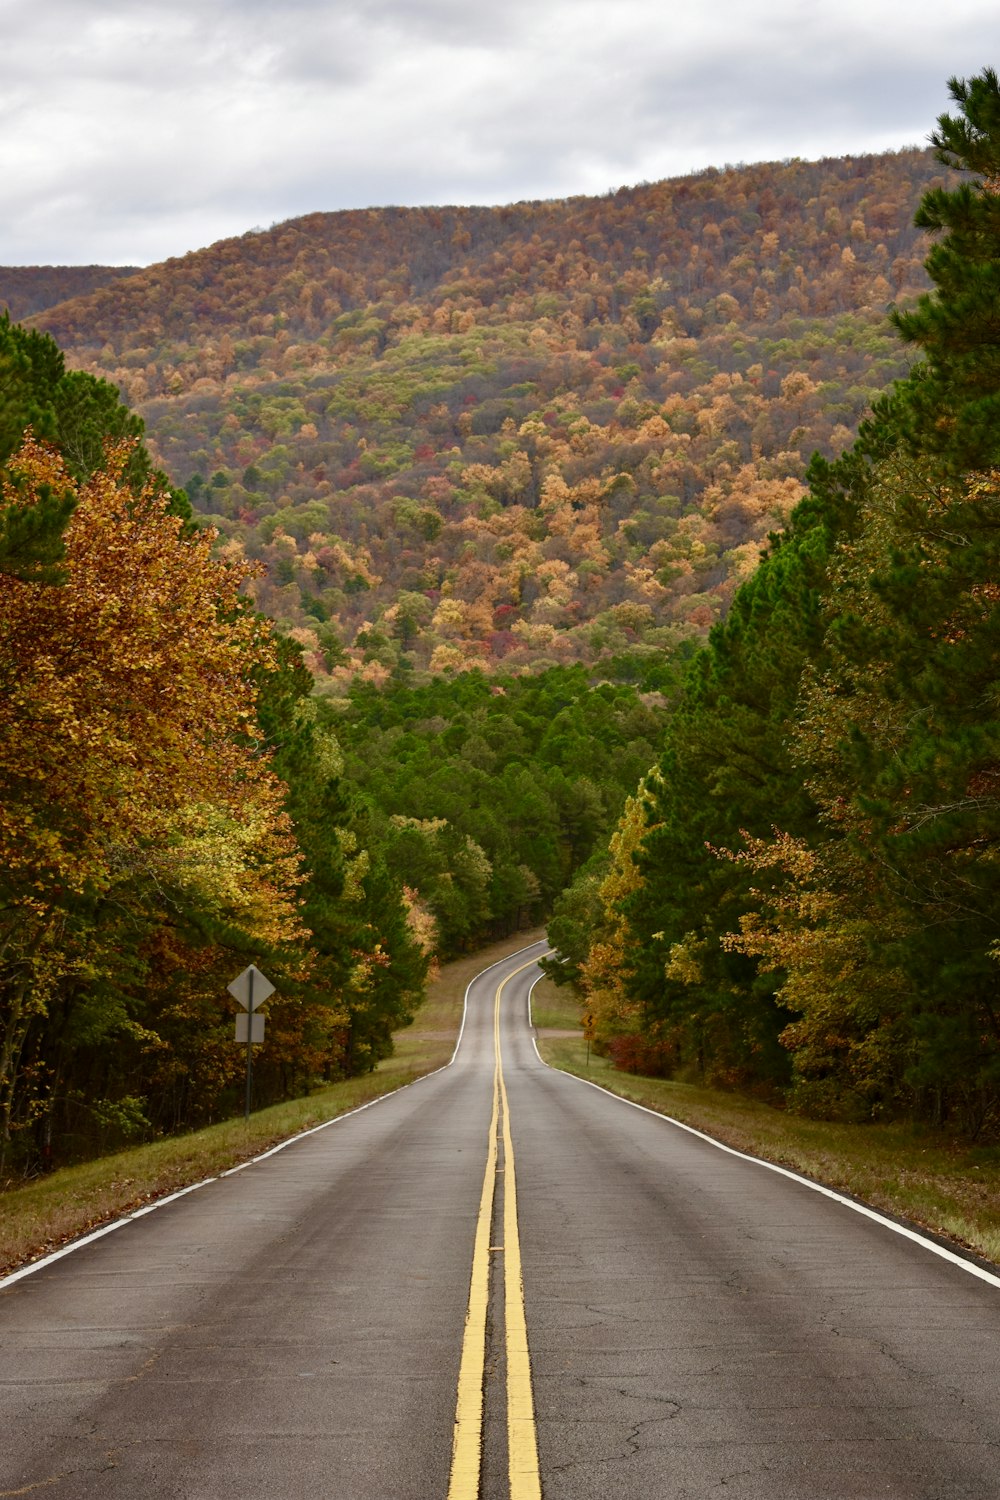 20 Road Backgrounds Hq Download Free Images On Unsplash 626 x 399 jpeg 51 kb. 20 road backgrounds hq download